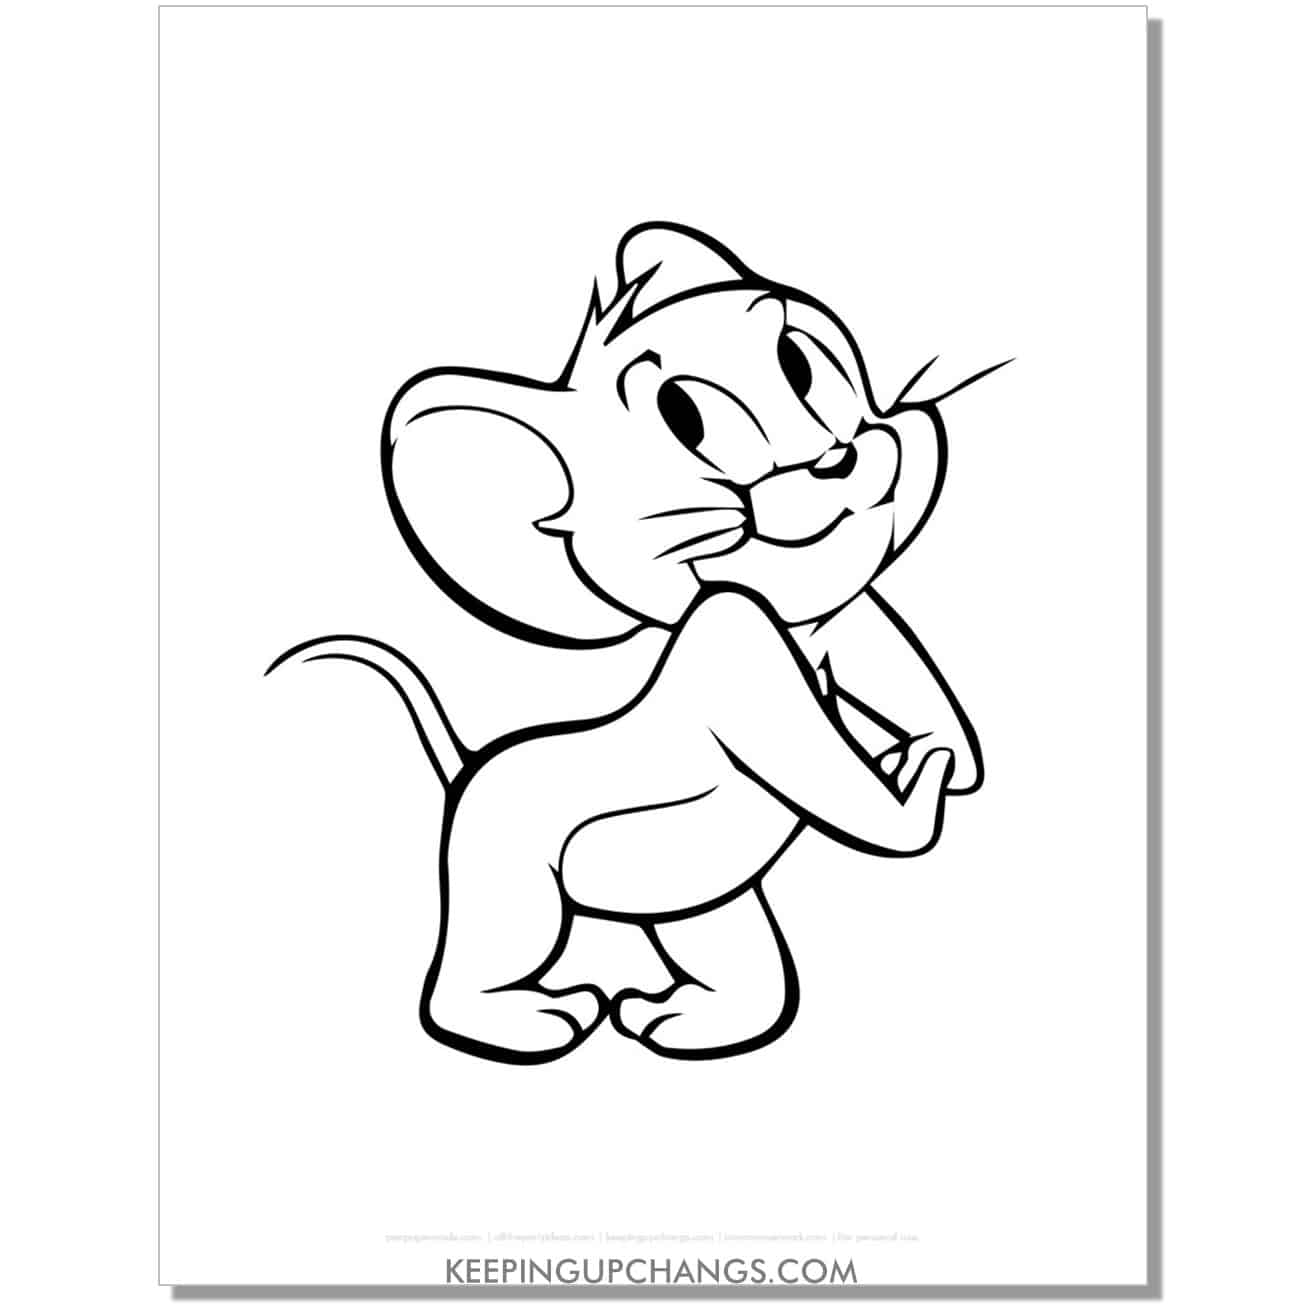 free jerry in cute pose coloring page.